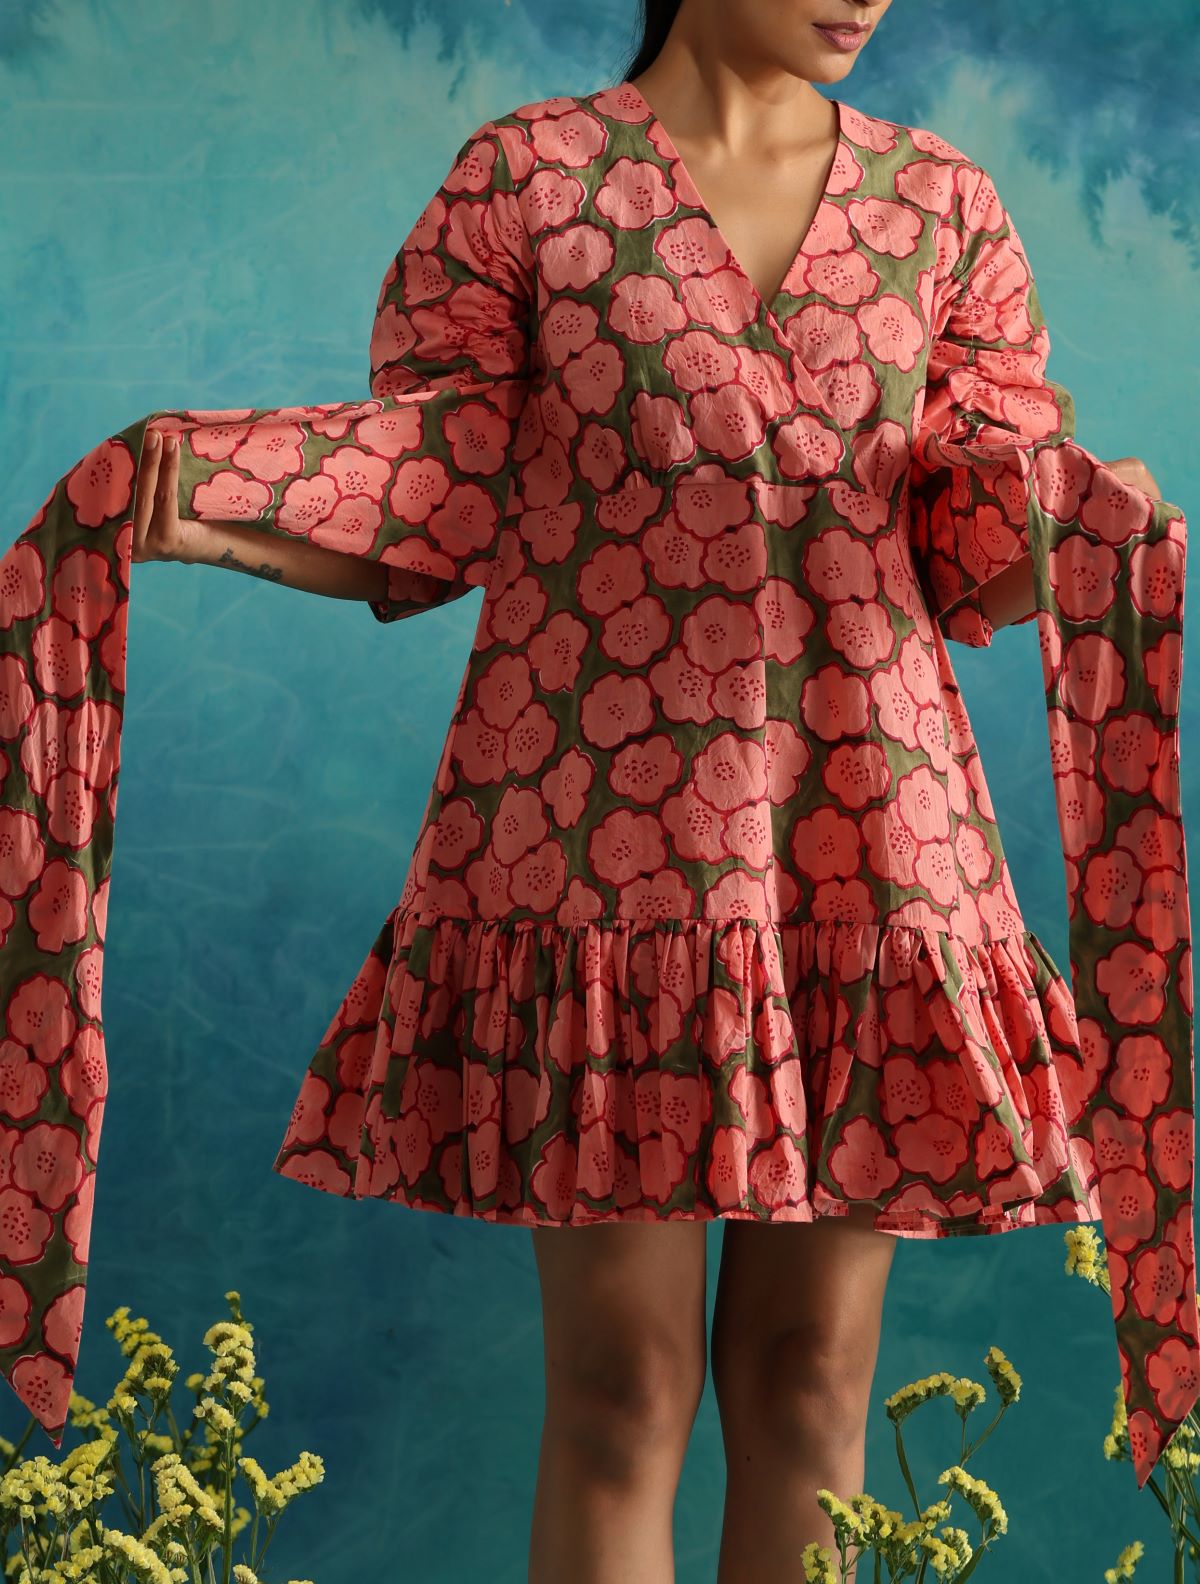 Strawberry Fields- Knotted short dress